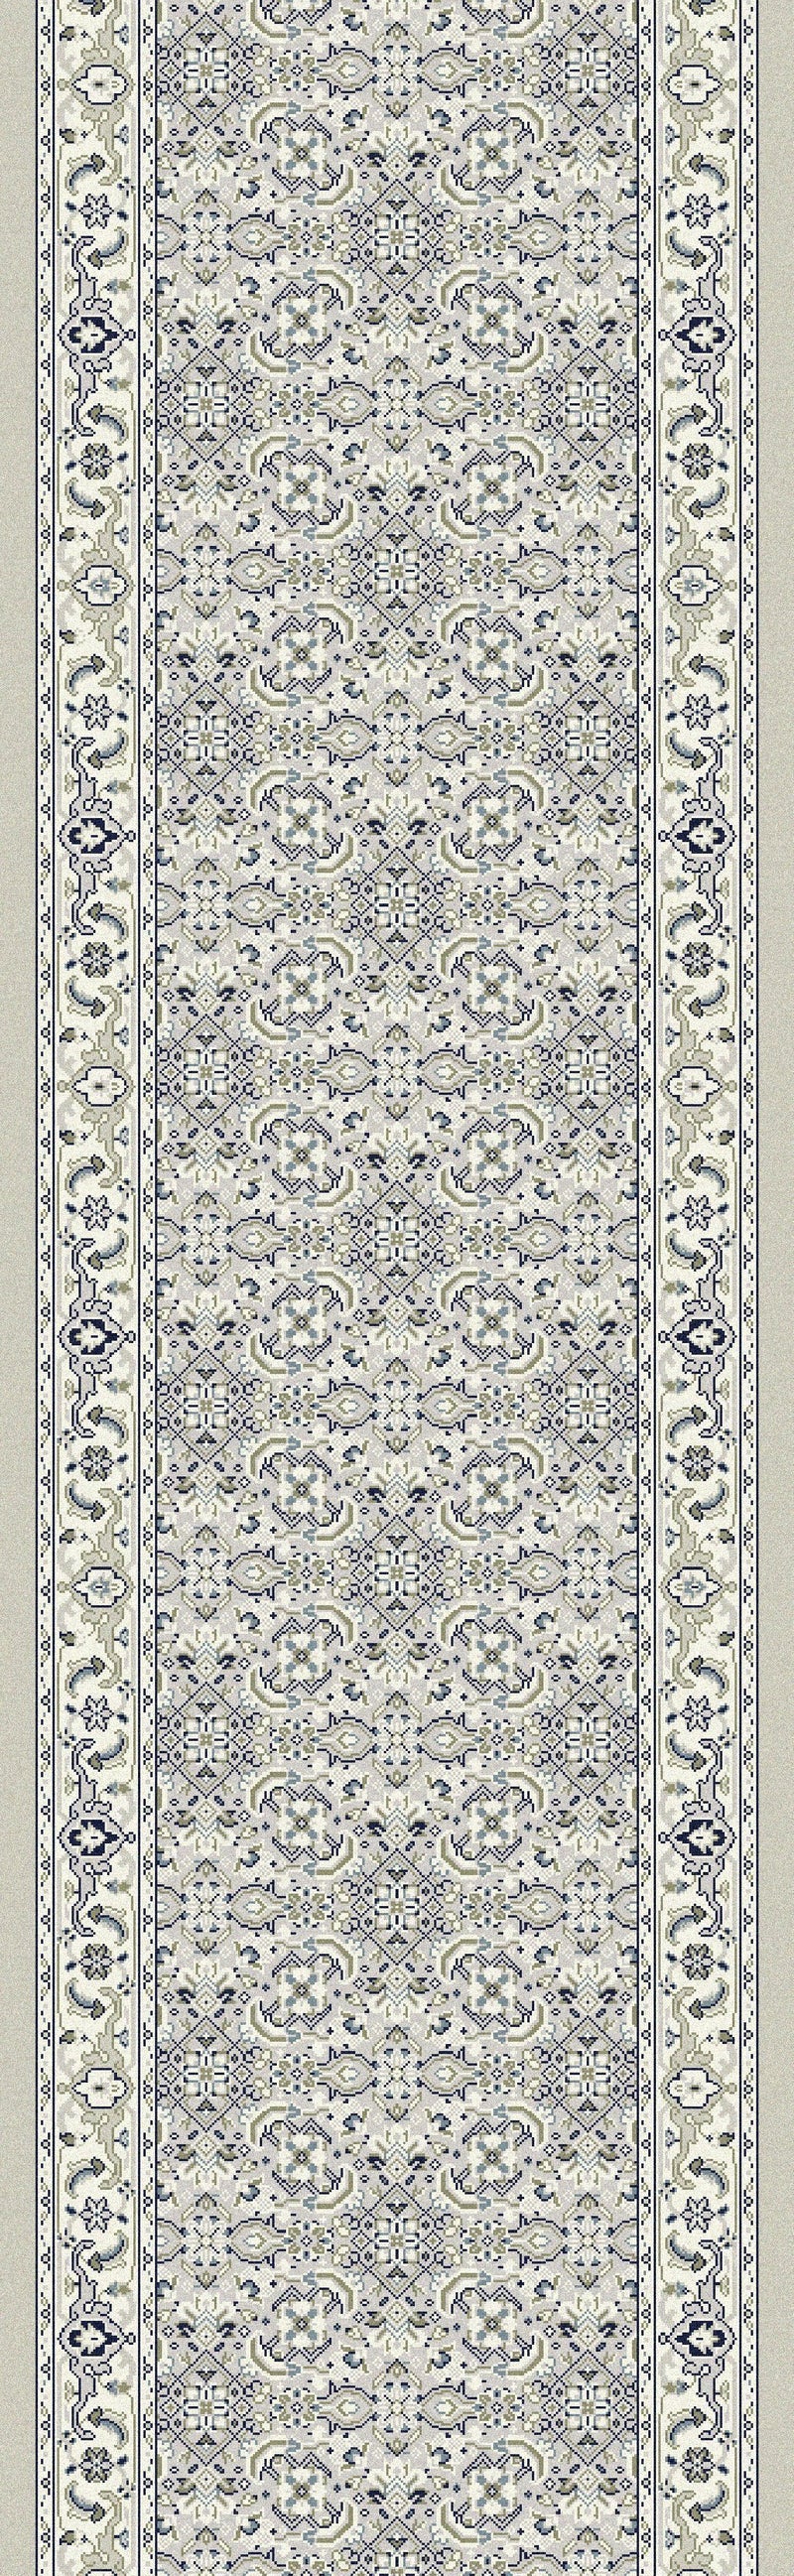 Dynamic Area Rugs Ancient Garden Area Rugs 57011-9666 Soft Grey 100% Poly Belgium 13 Sizes